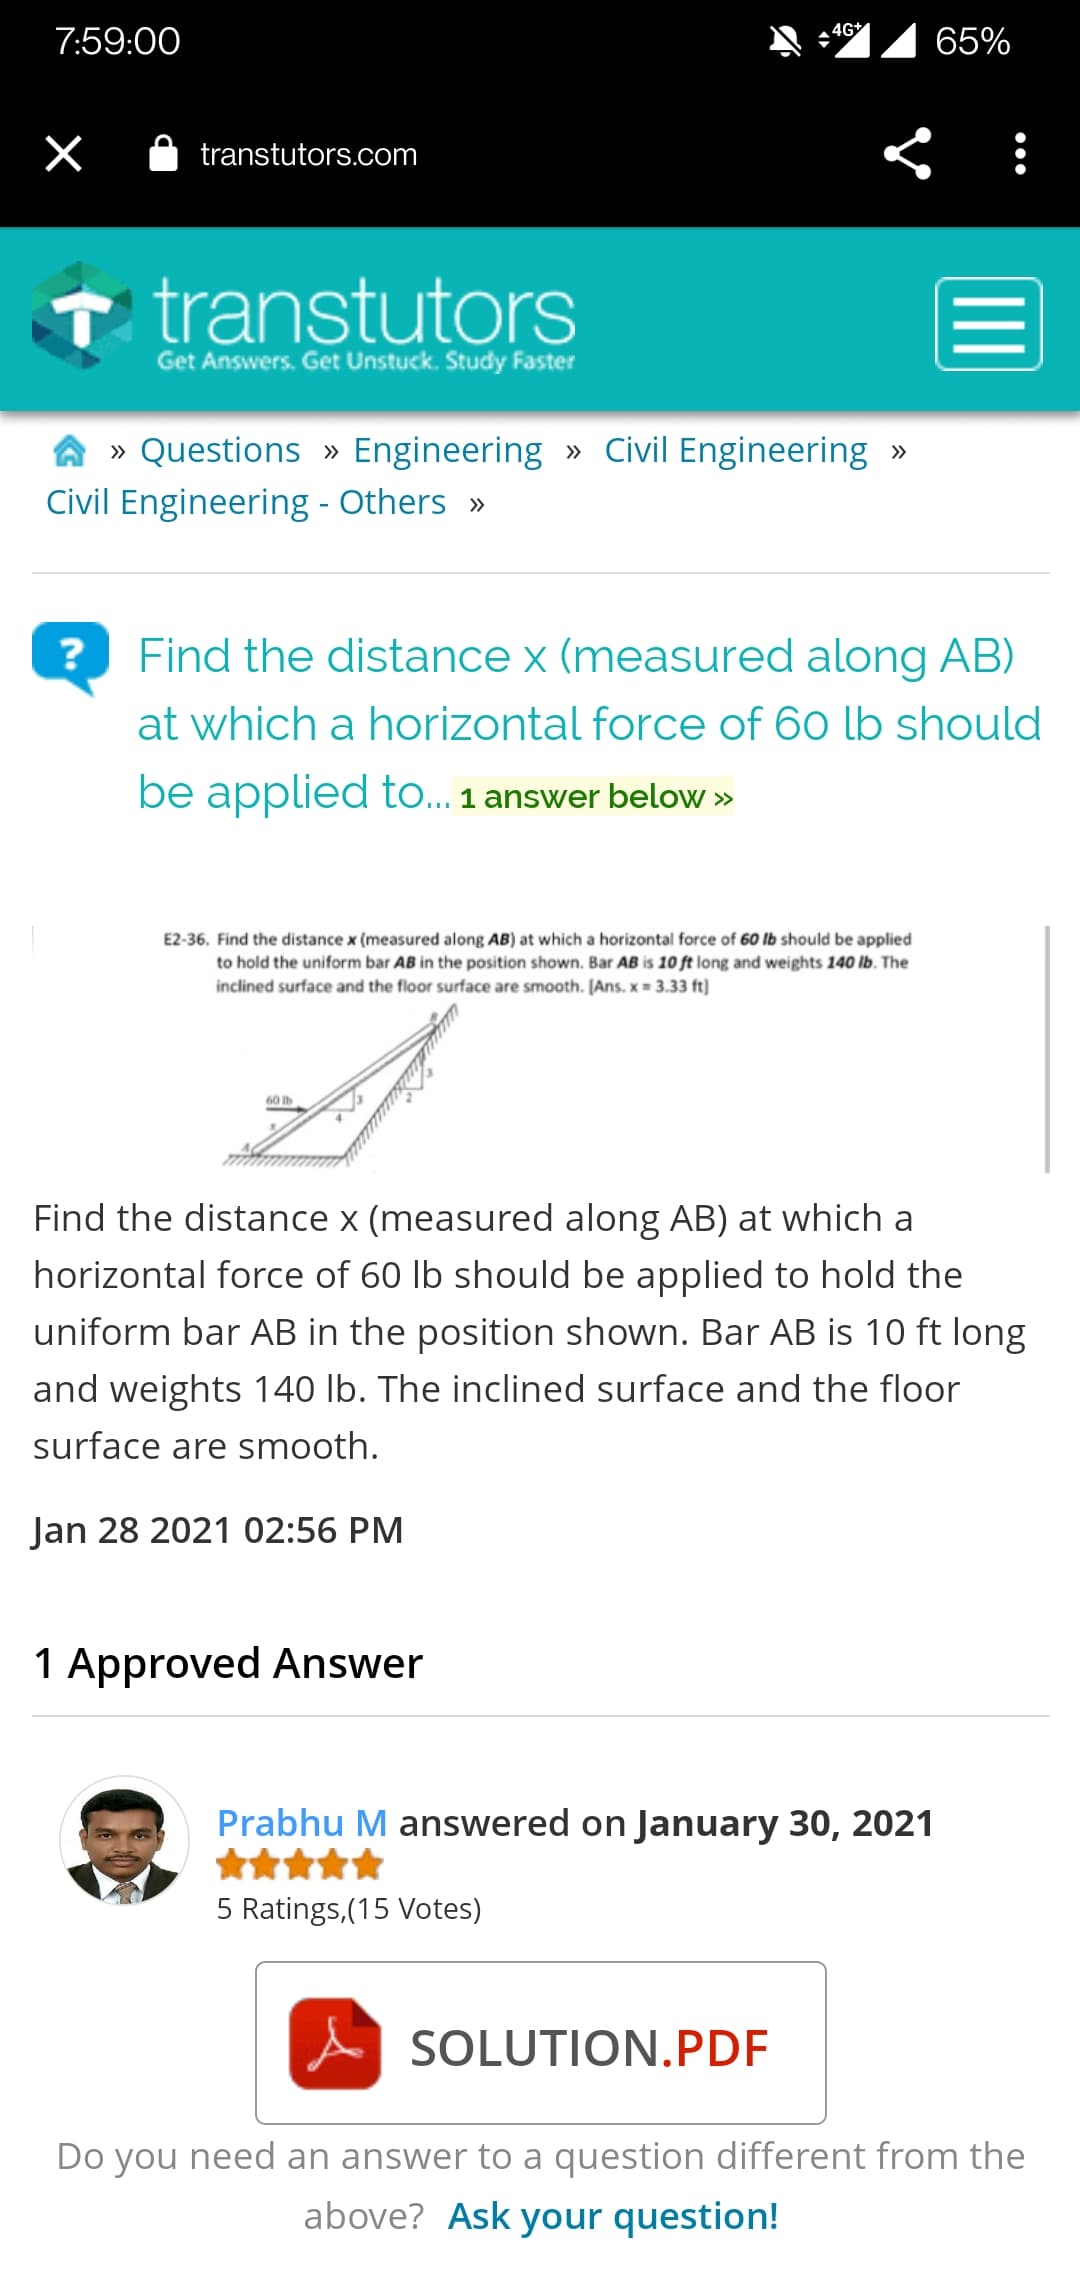 4G
7:59:00
65%
transtutors.com
T transtutors
Get Answers. Get Unstuck. Study Faster
» Questions » Engineering » Civil Engineering »
Civil Engineering - Others »
?
Find the distance x (measured along AB)
at which a horizontal force of 60 lb should
be applied to... 1 answer below »
E2-36. Find the distance x (measured along AB) at which a horizontal force of 60 lb should be applied
to hold the uniform bar AB in the position shown. Bar AB is 10 ft long and weights 140 lb. The
inclined surface and the floor surface are smooth. [Ans. x = 3.33 ft)
60 Ib
Find the distance x (measured along AB) at which a
horizontal force of 60 lb should be applied to hold the
uniform bar AB in the position shown. Bar AB is 10 ft long
and weights 140 lb. The inclined surface and the floor
surface are smooth.
Jan 28 2021 02:56 PM
1 Approved Answer
Prabhu M answered on January 30, 2021
5 Ratings, (15 Votes)
SOLUTION.PDF
Do you need an answer to a question different from the
above? Ask your question!
II
